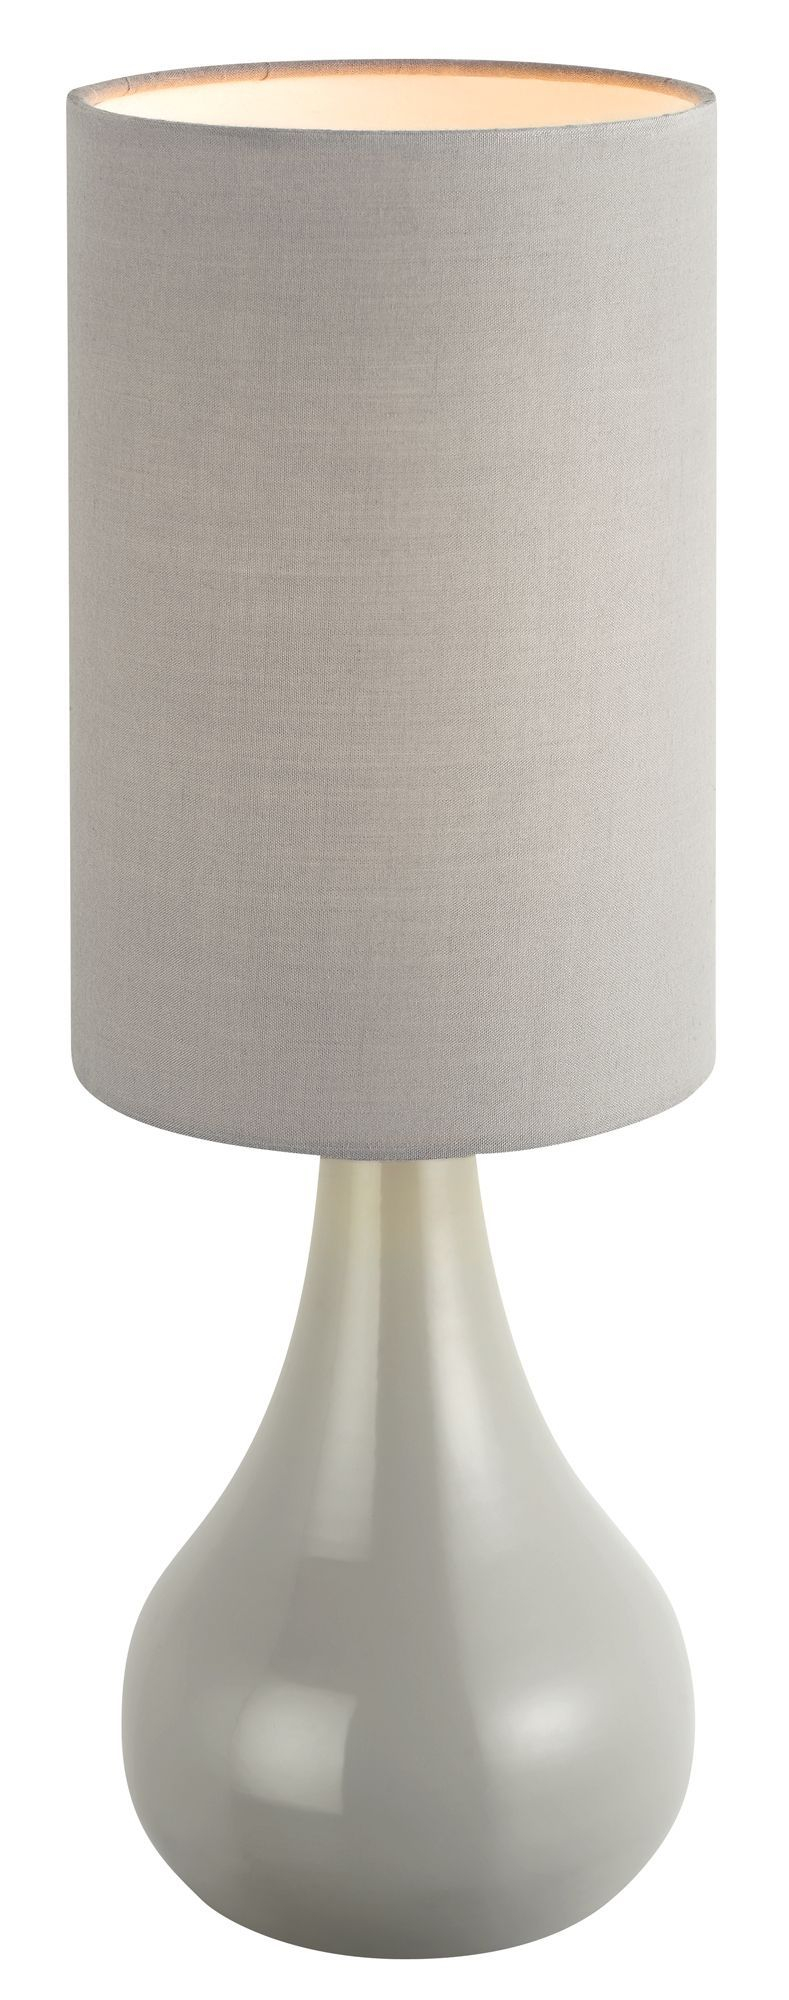 Colours Ariel Table Lamp Departments Diy At Bq Guest Bedroom throughout sizing 789 X 2000